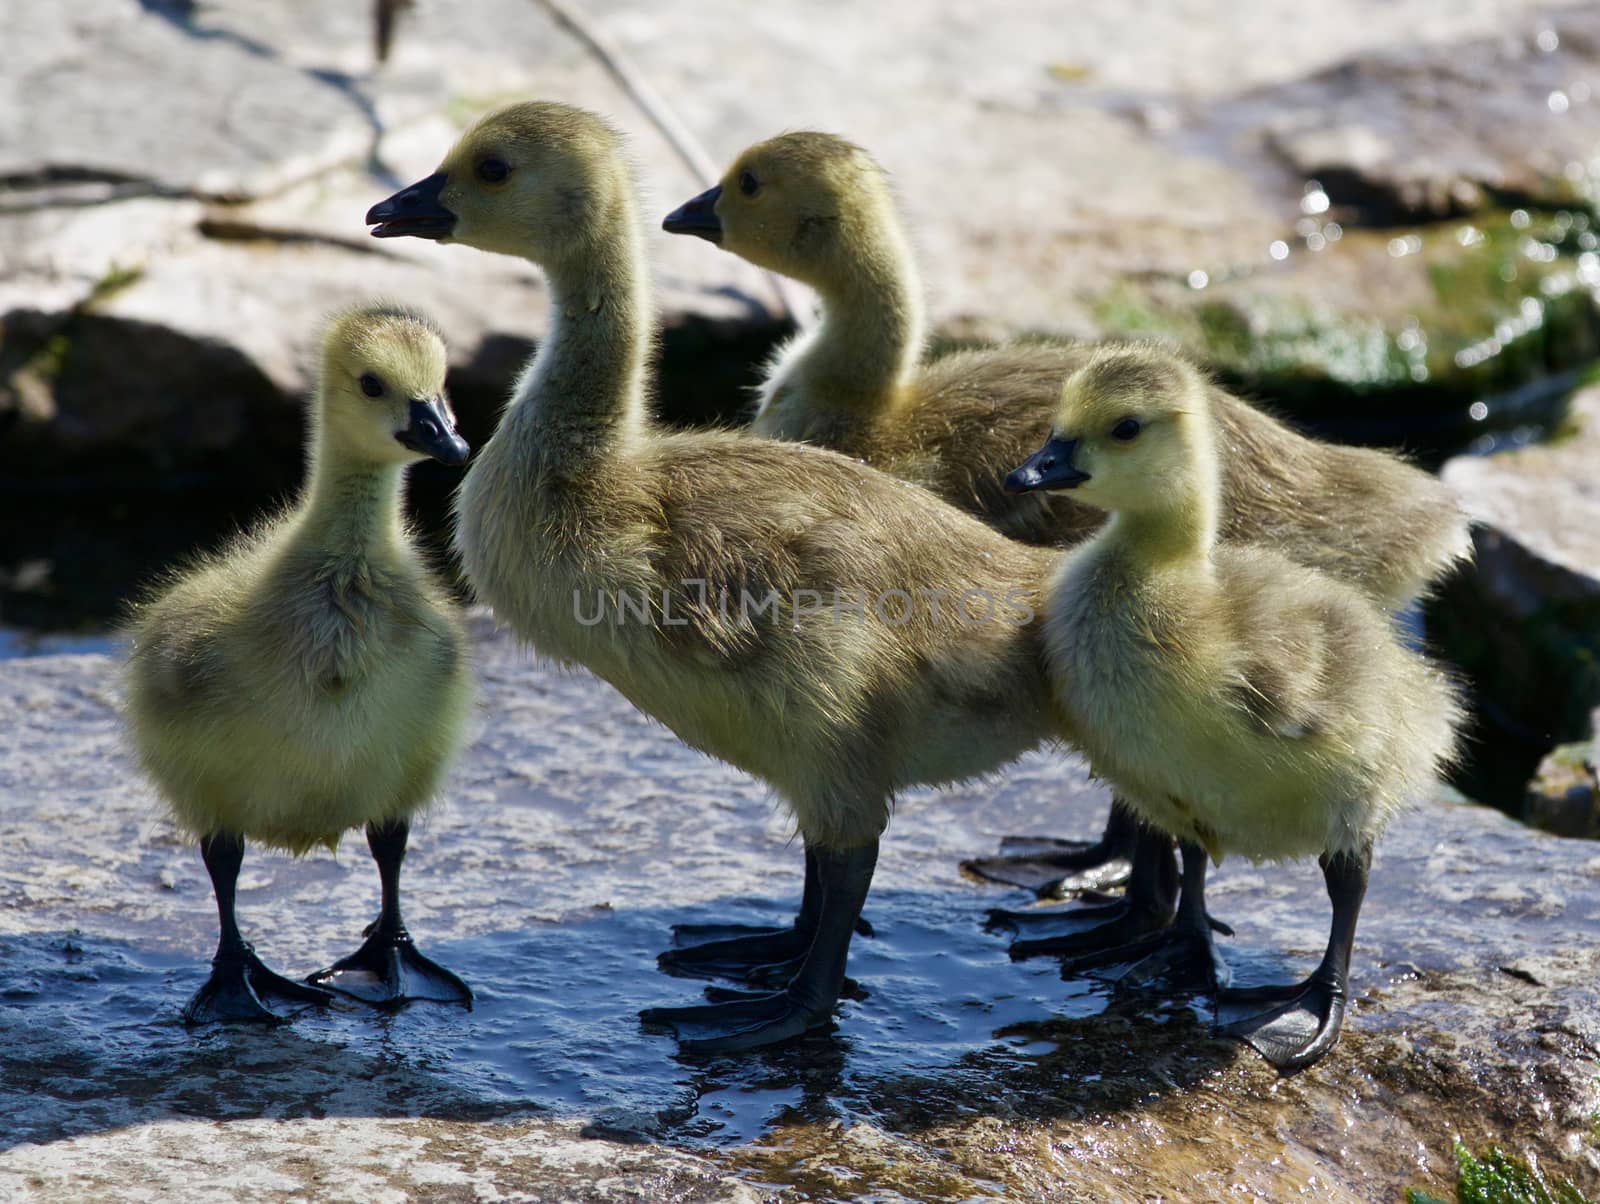 Beautiful photo of a group of the small chicks of the Canada geese